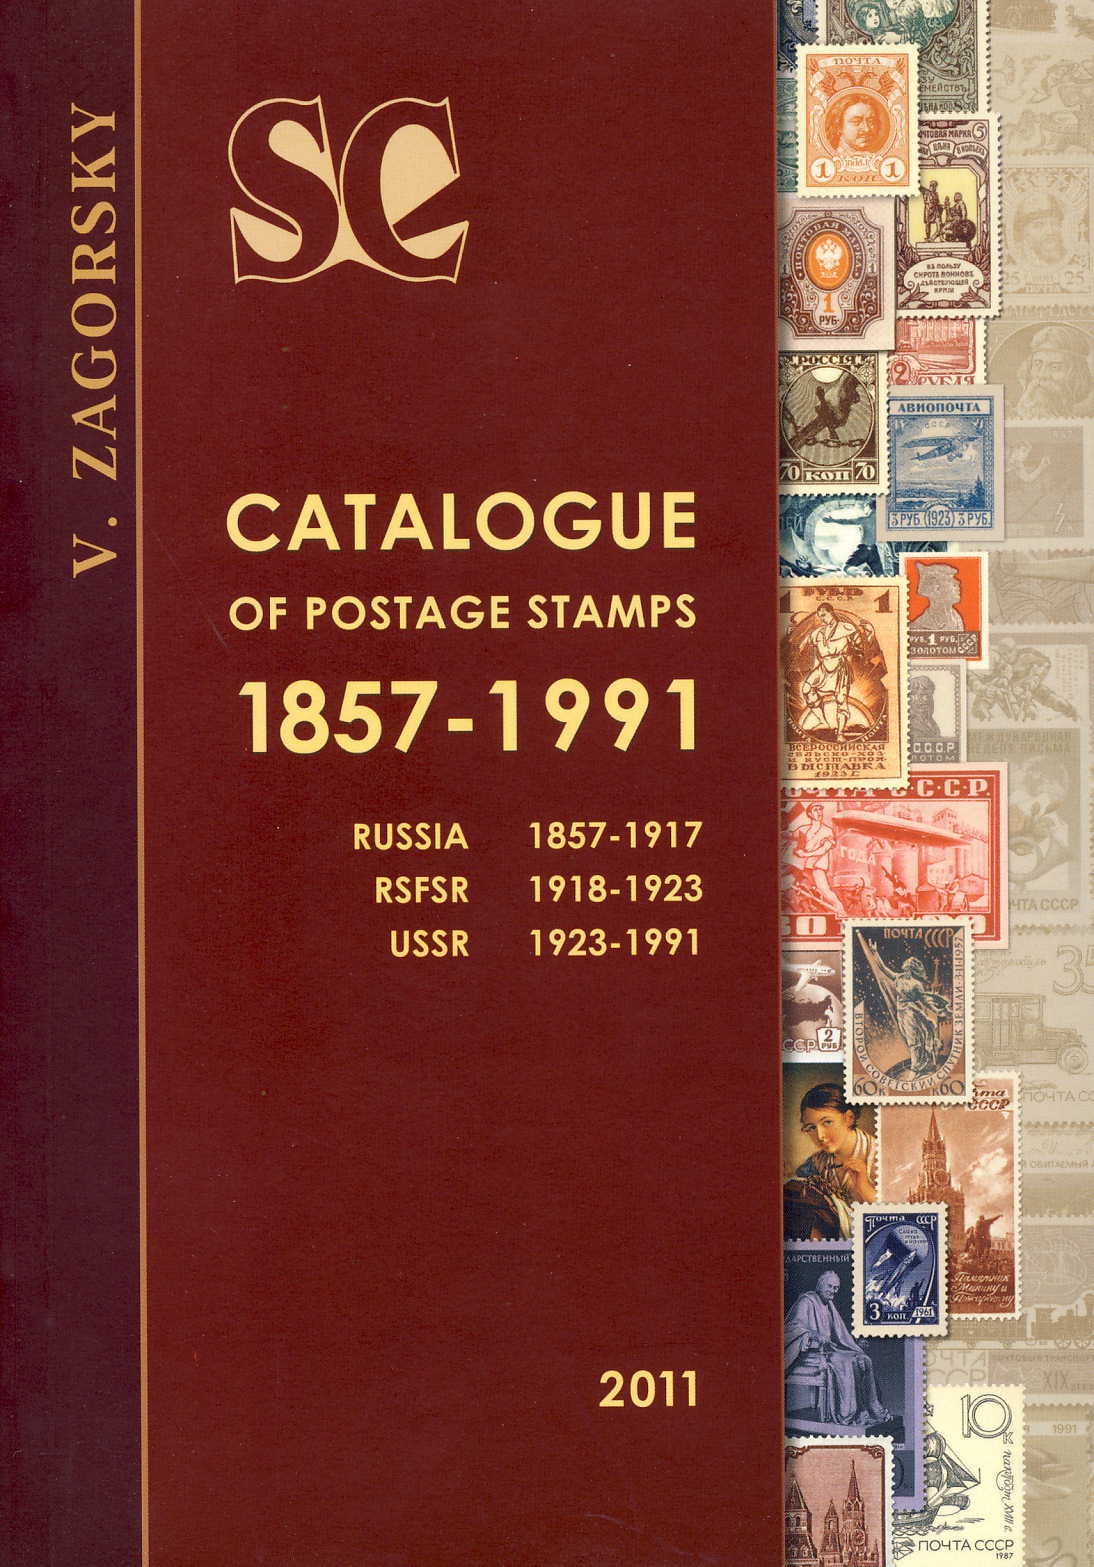 Zagorsky Catalogue of Postage Stamps 1857-1991 (2011) Russia 185